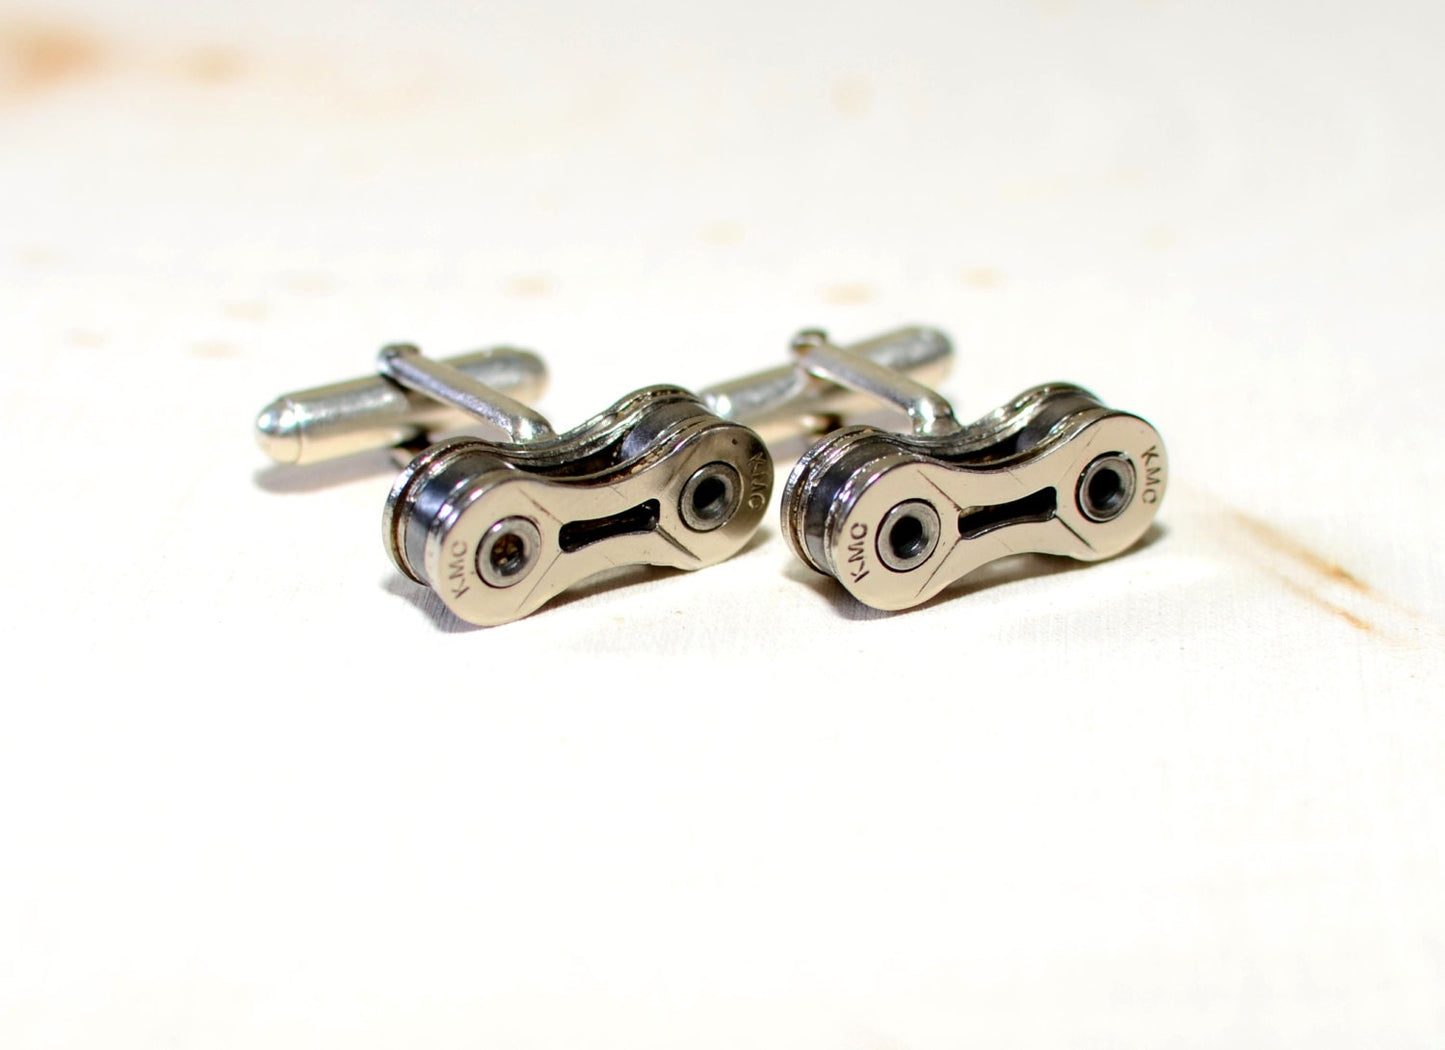 Bicycle Chain Cuff Links with Solid 925 Sterling Silver Torpedo Links